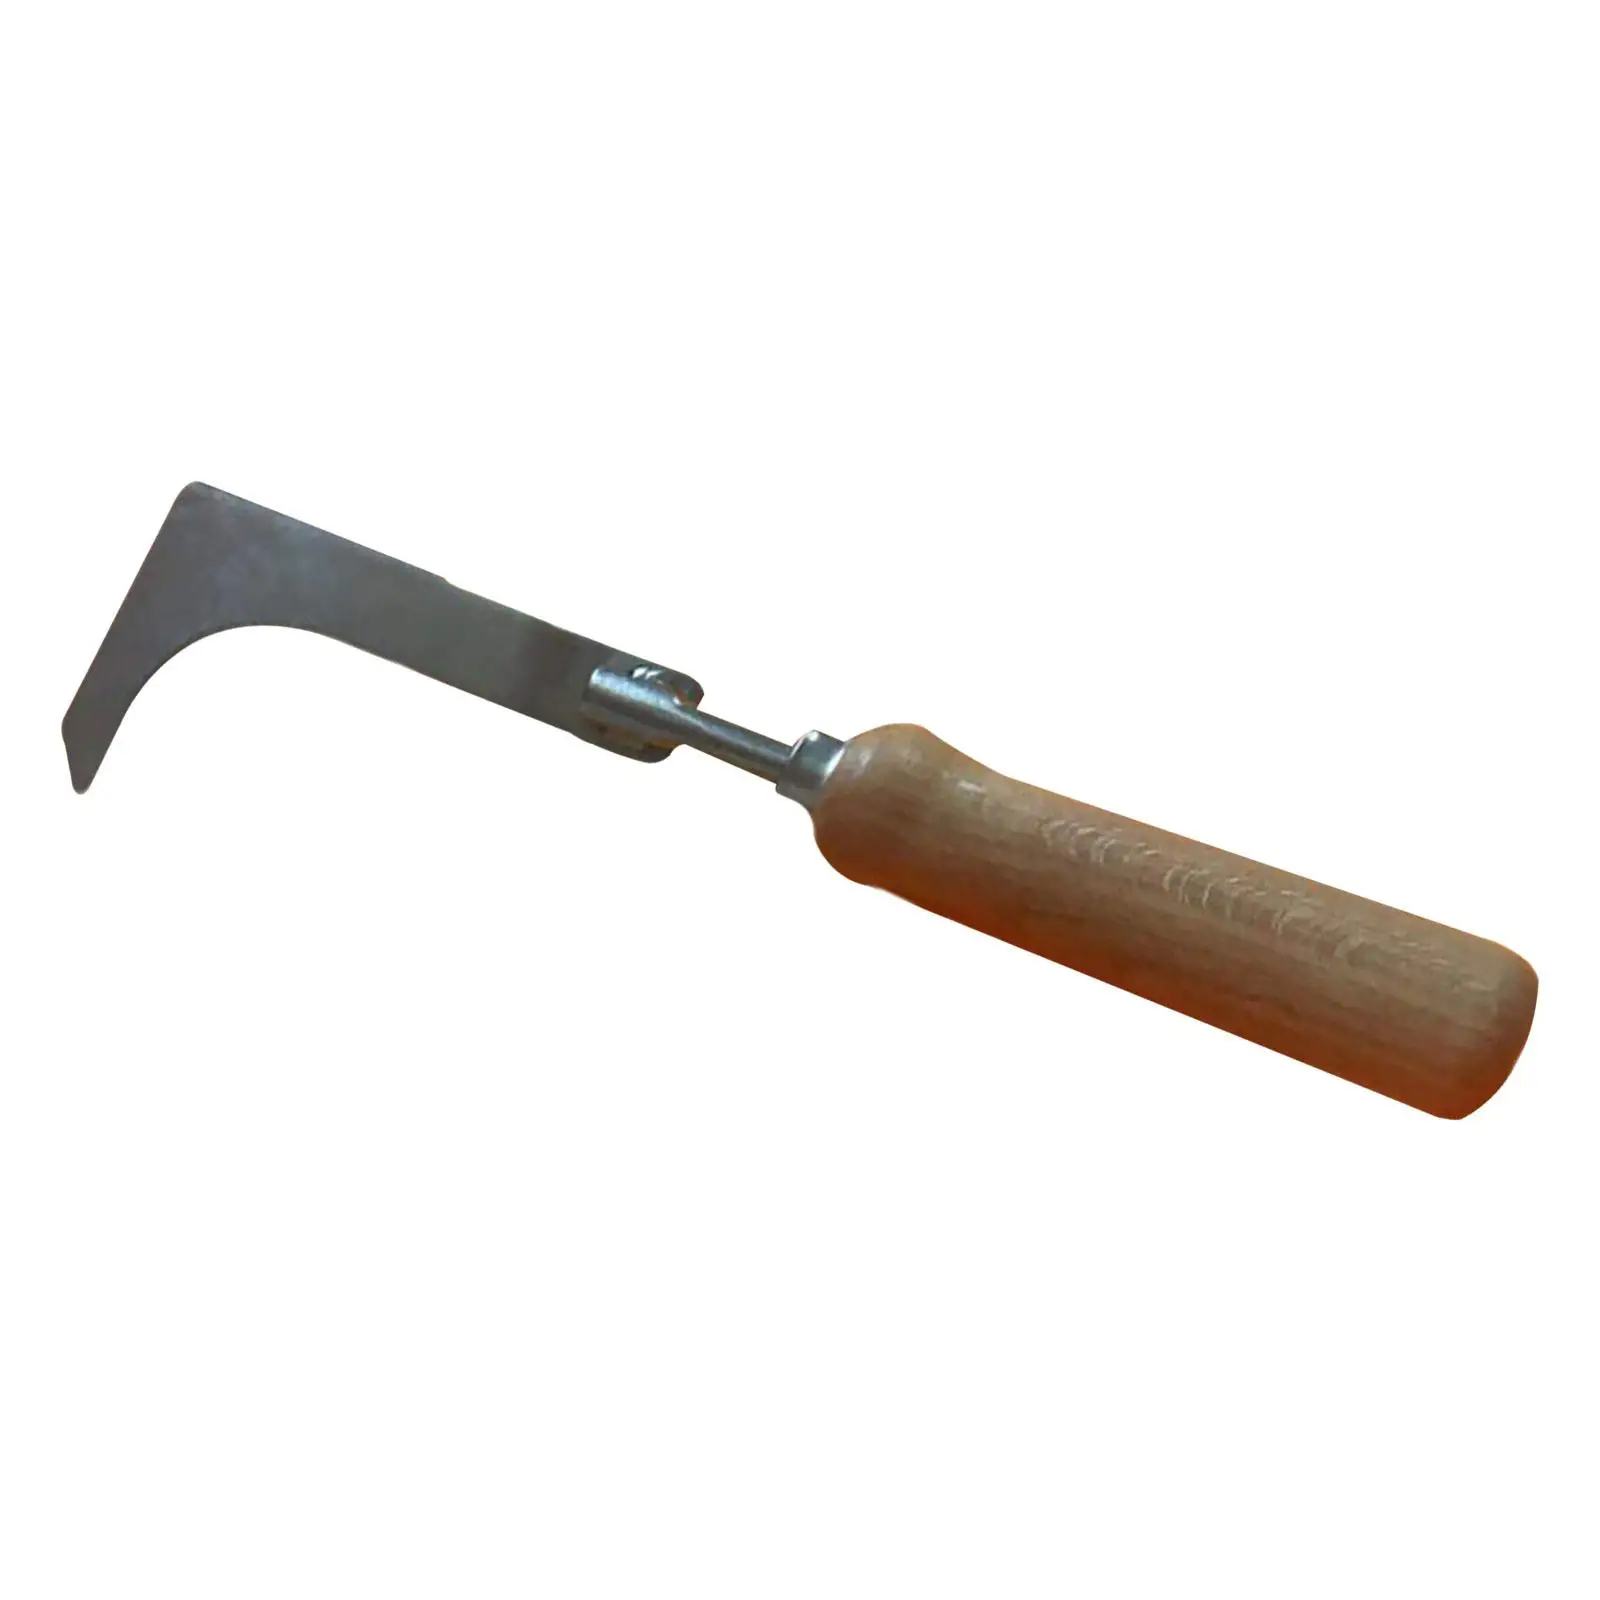 Crack Weeder Stainless L Shaped Blade Wooden Handle Side Walk Weeding Tool for Farm Gardening Lawn Yard Terrace Paving